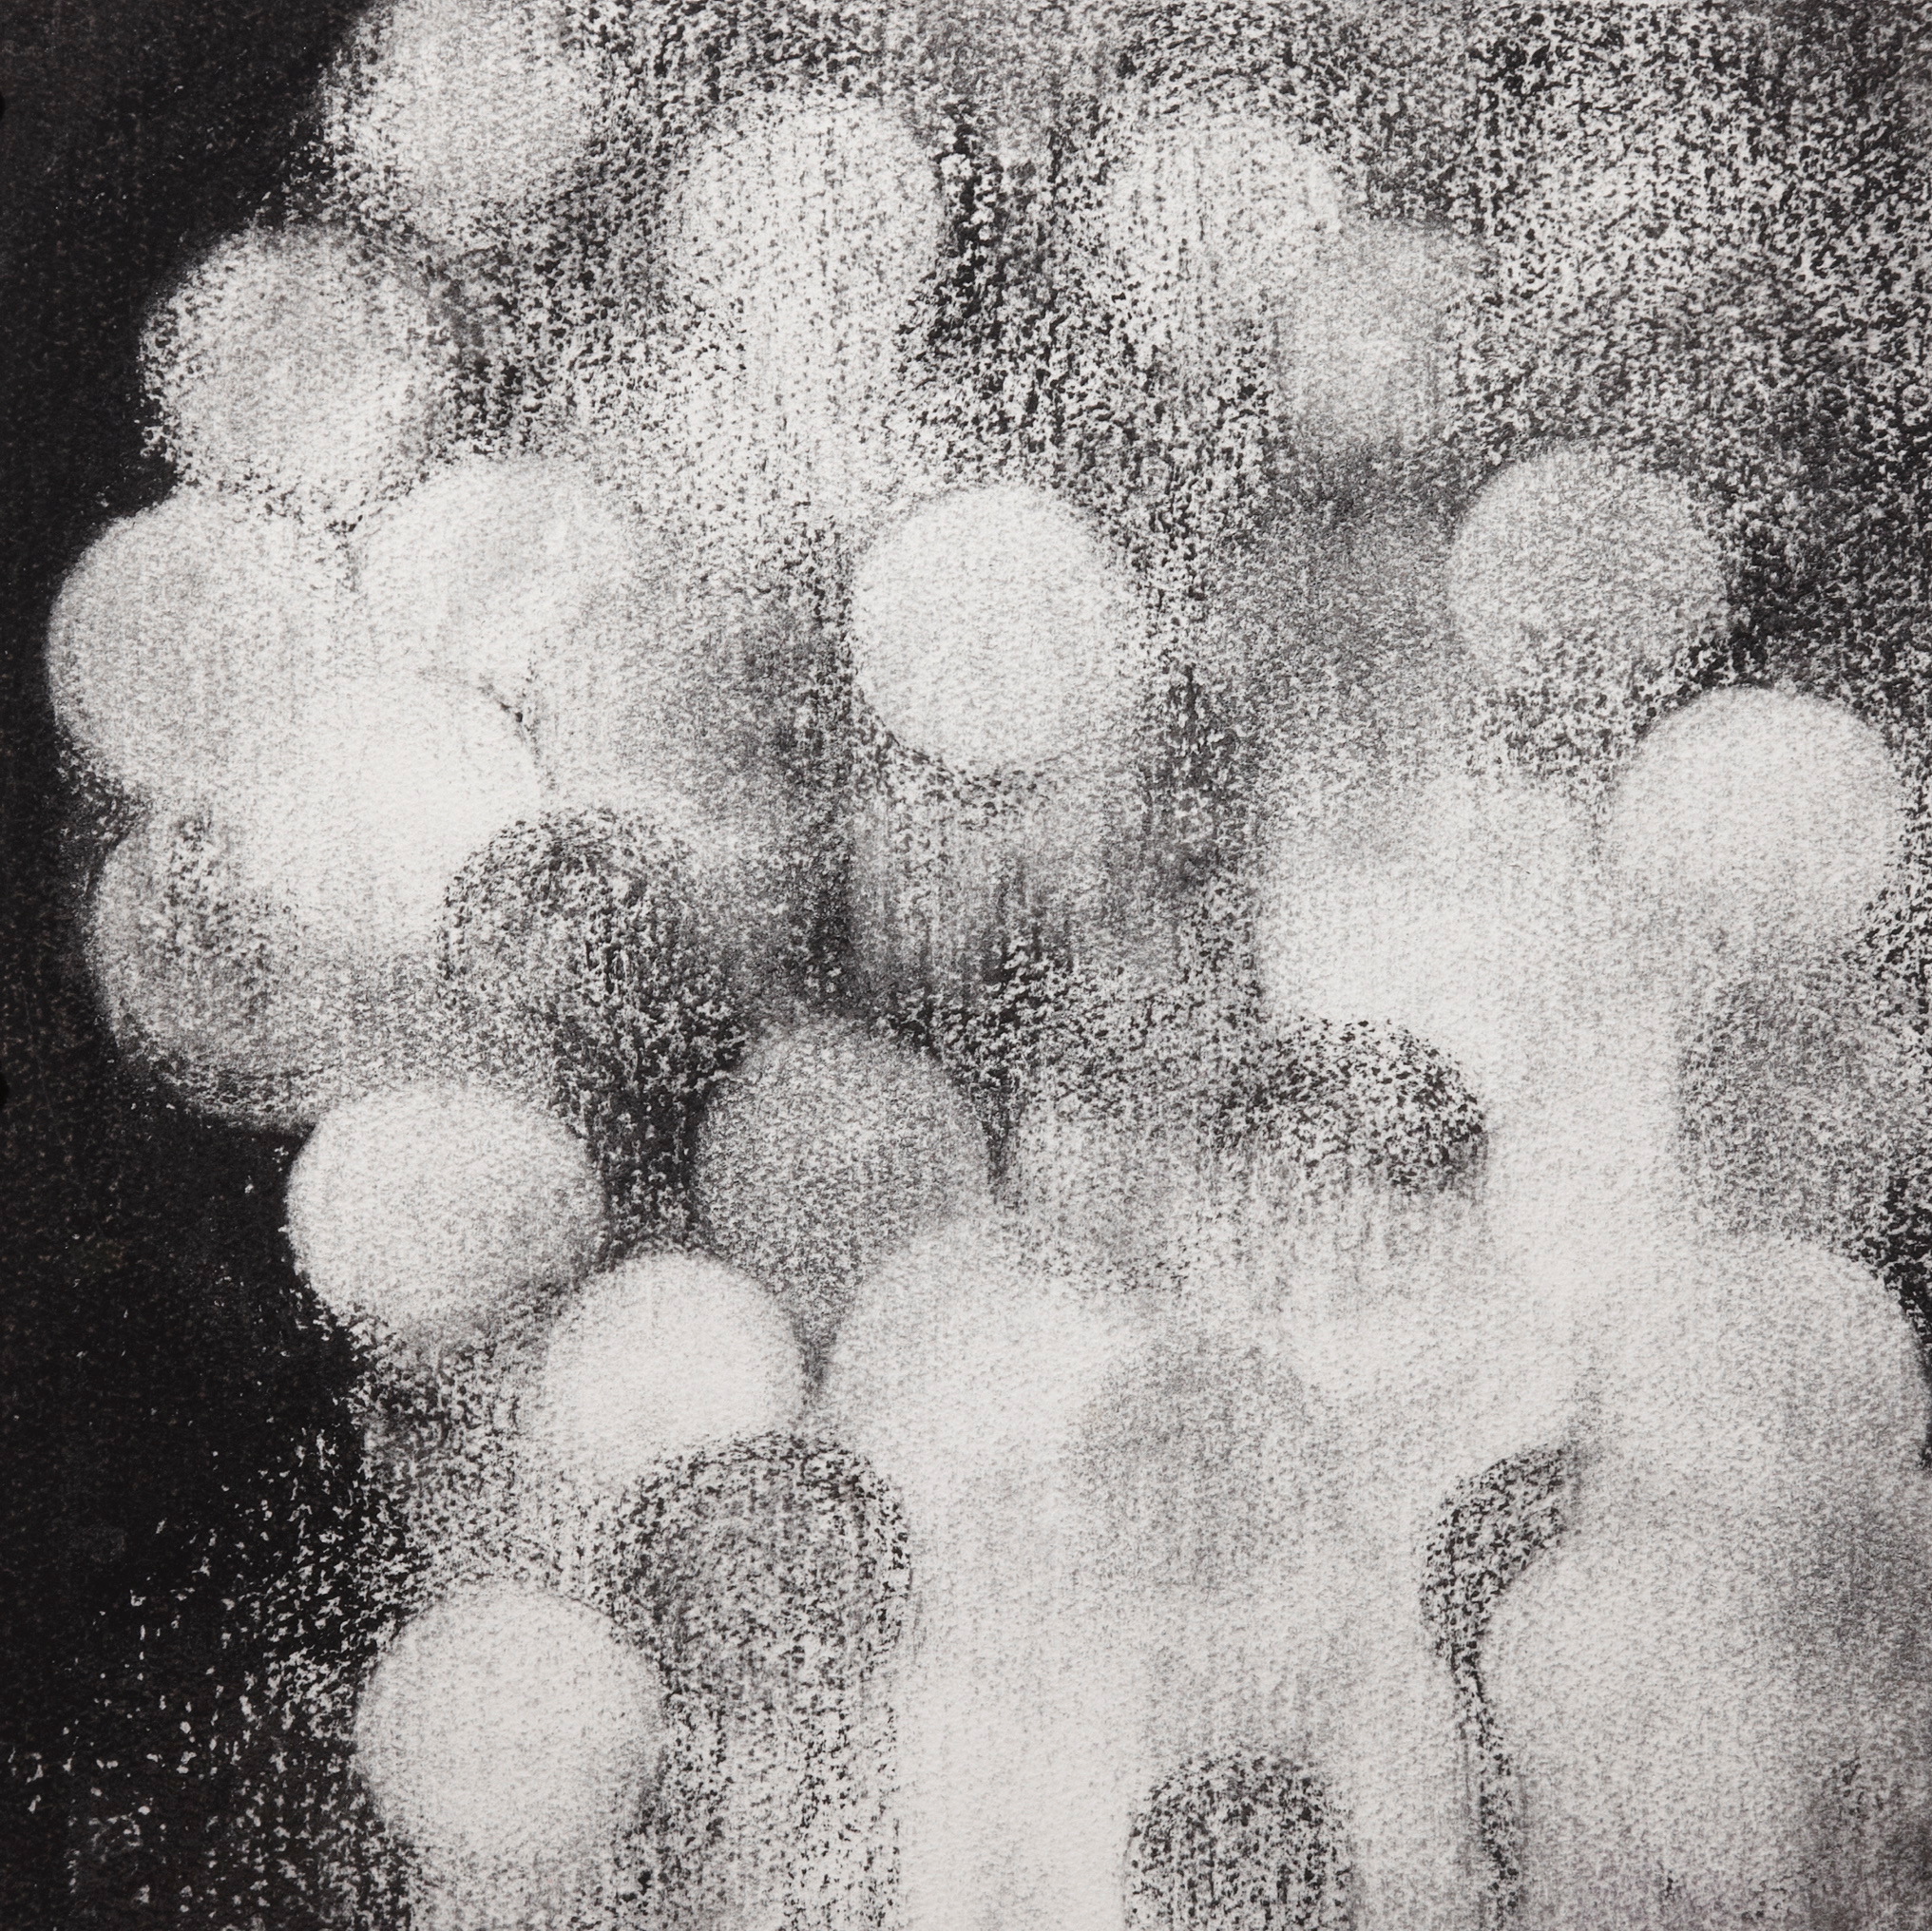  Disolving, 2009, charcoal on paper, 40.5x 40.5cm 